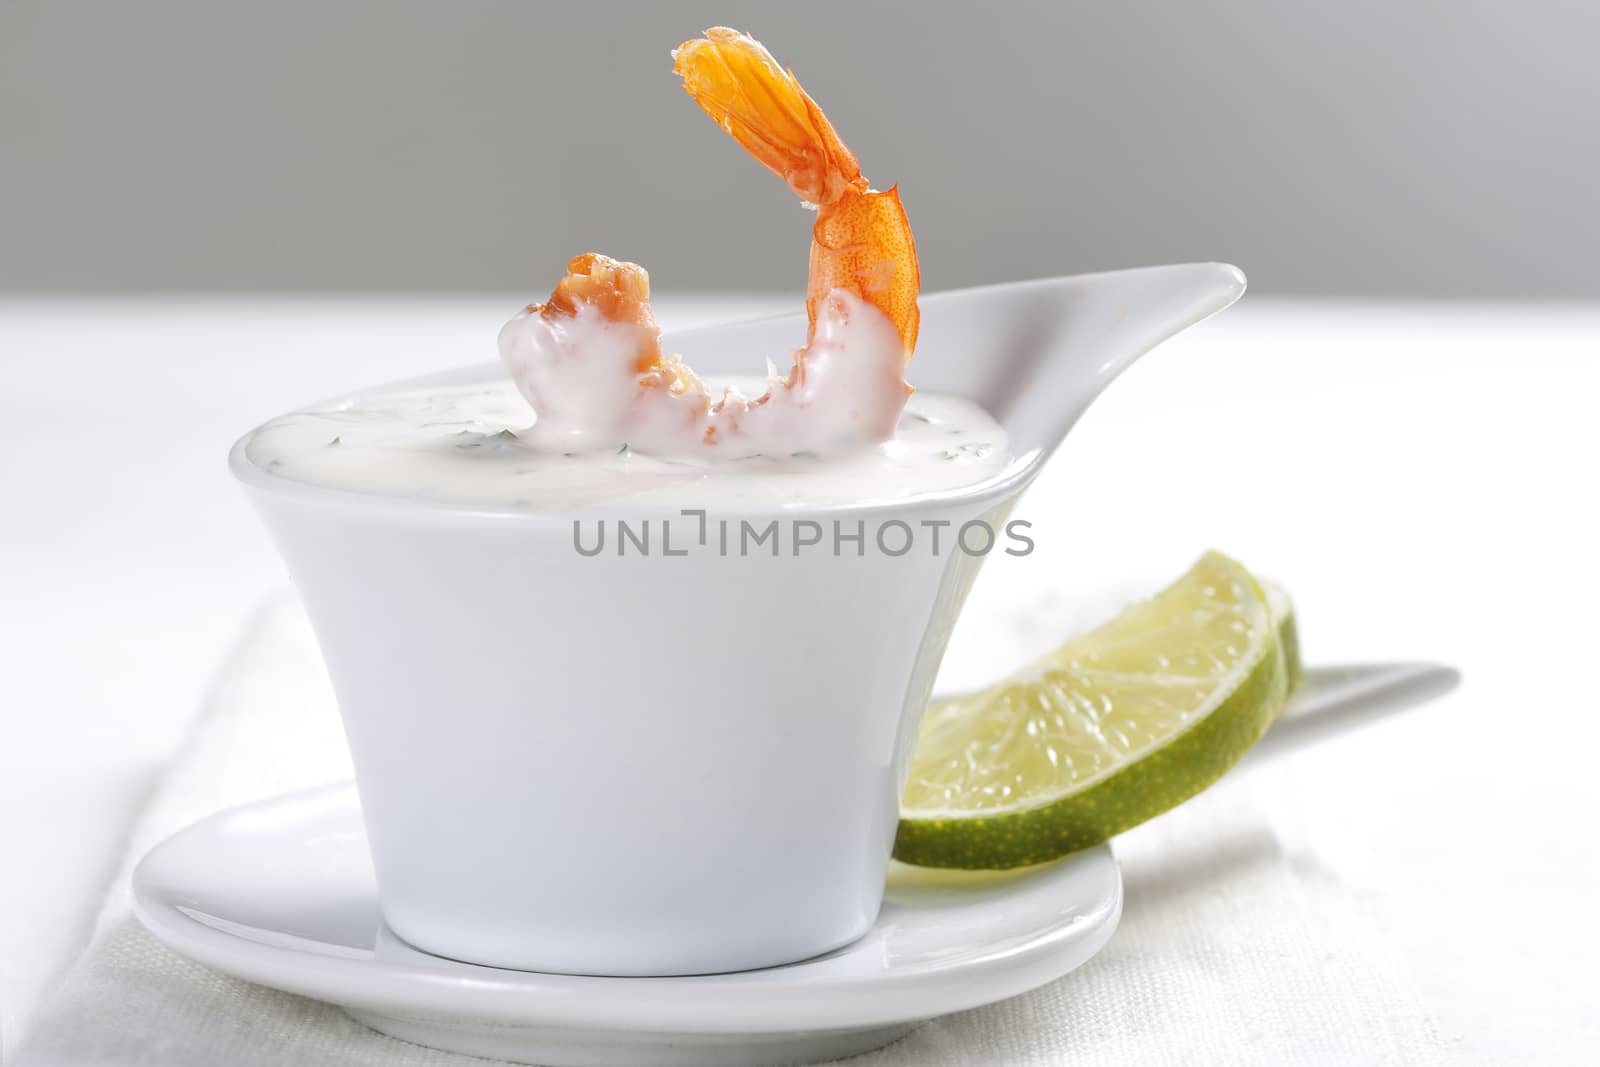 Shrimp dipped in sauce and lime